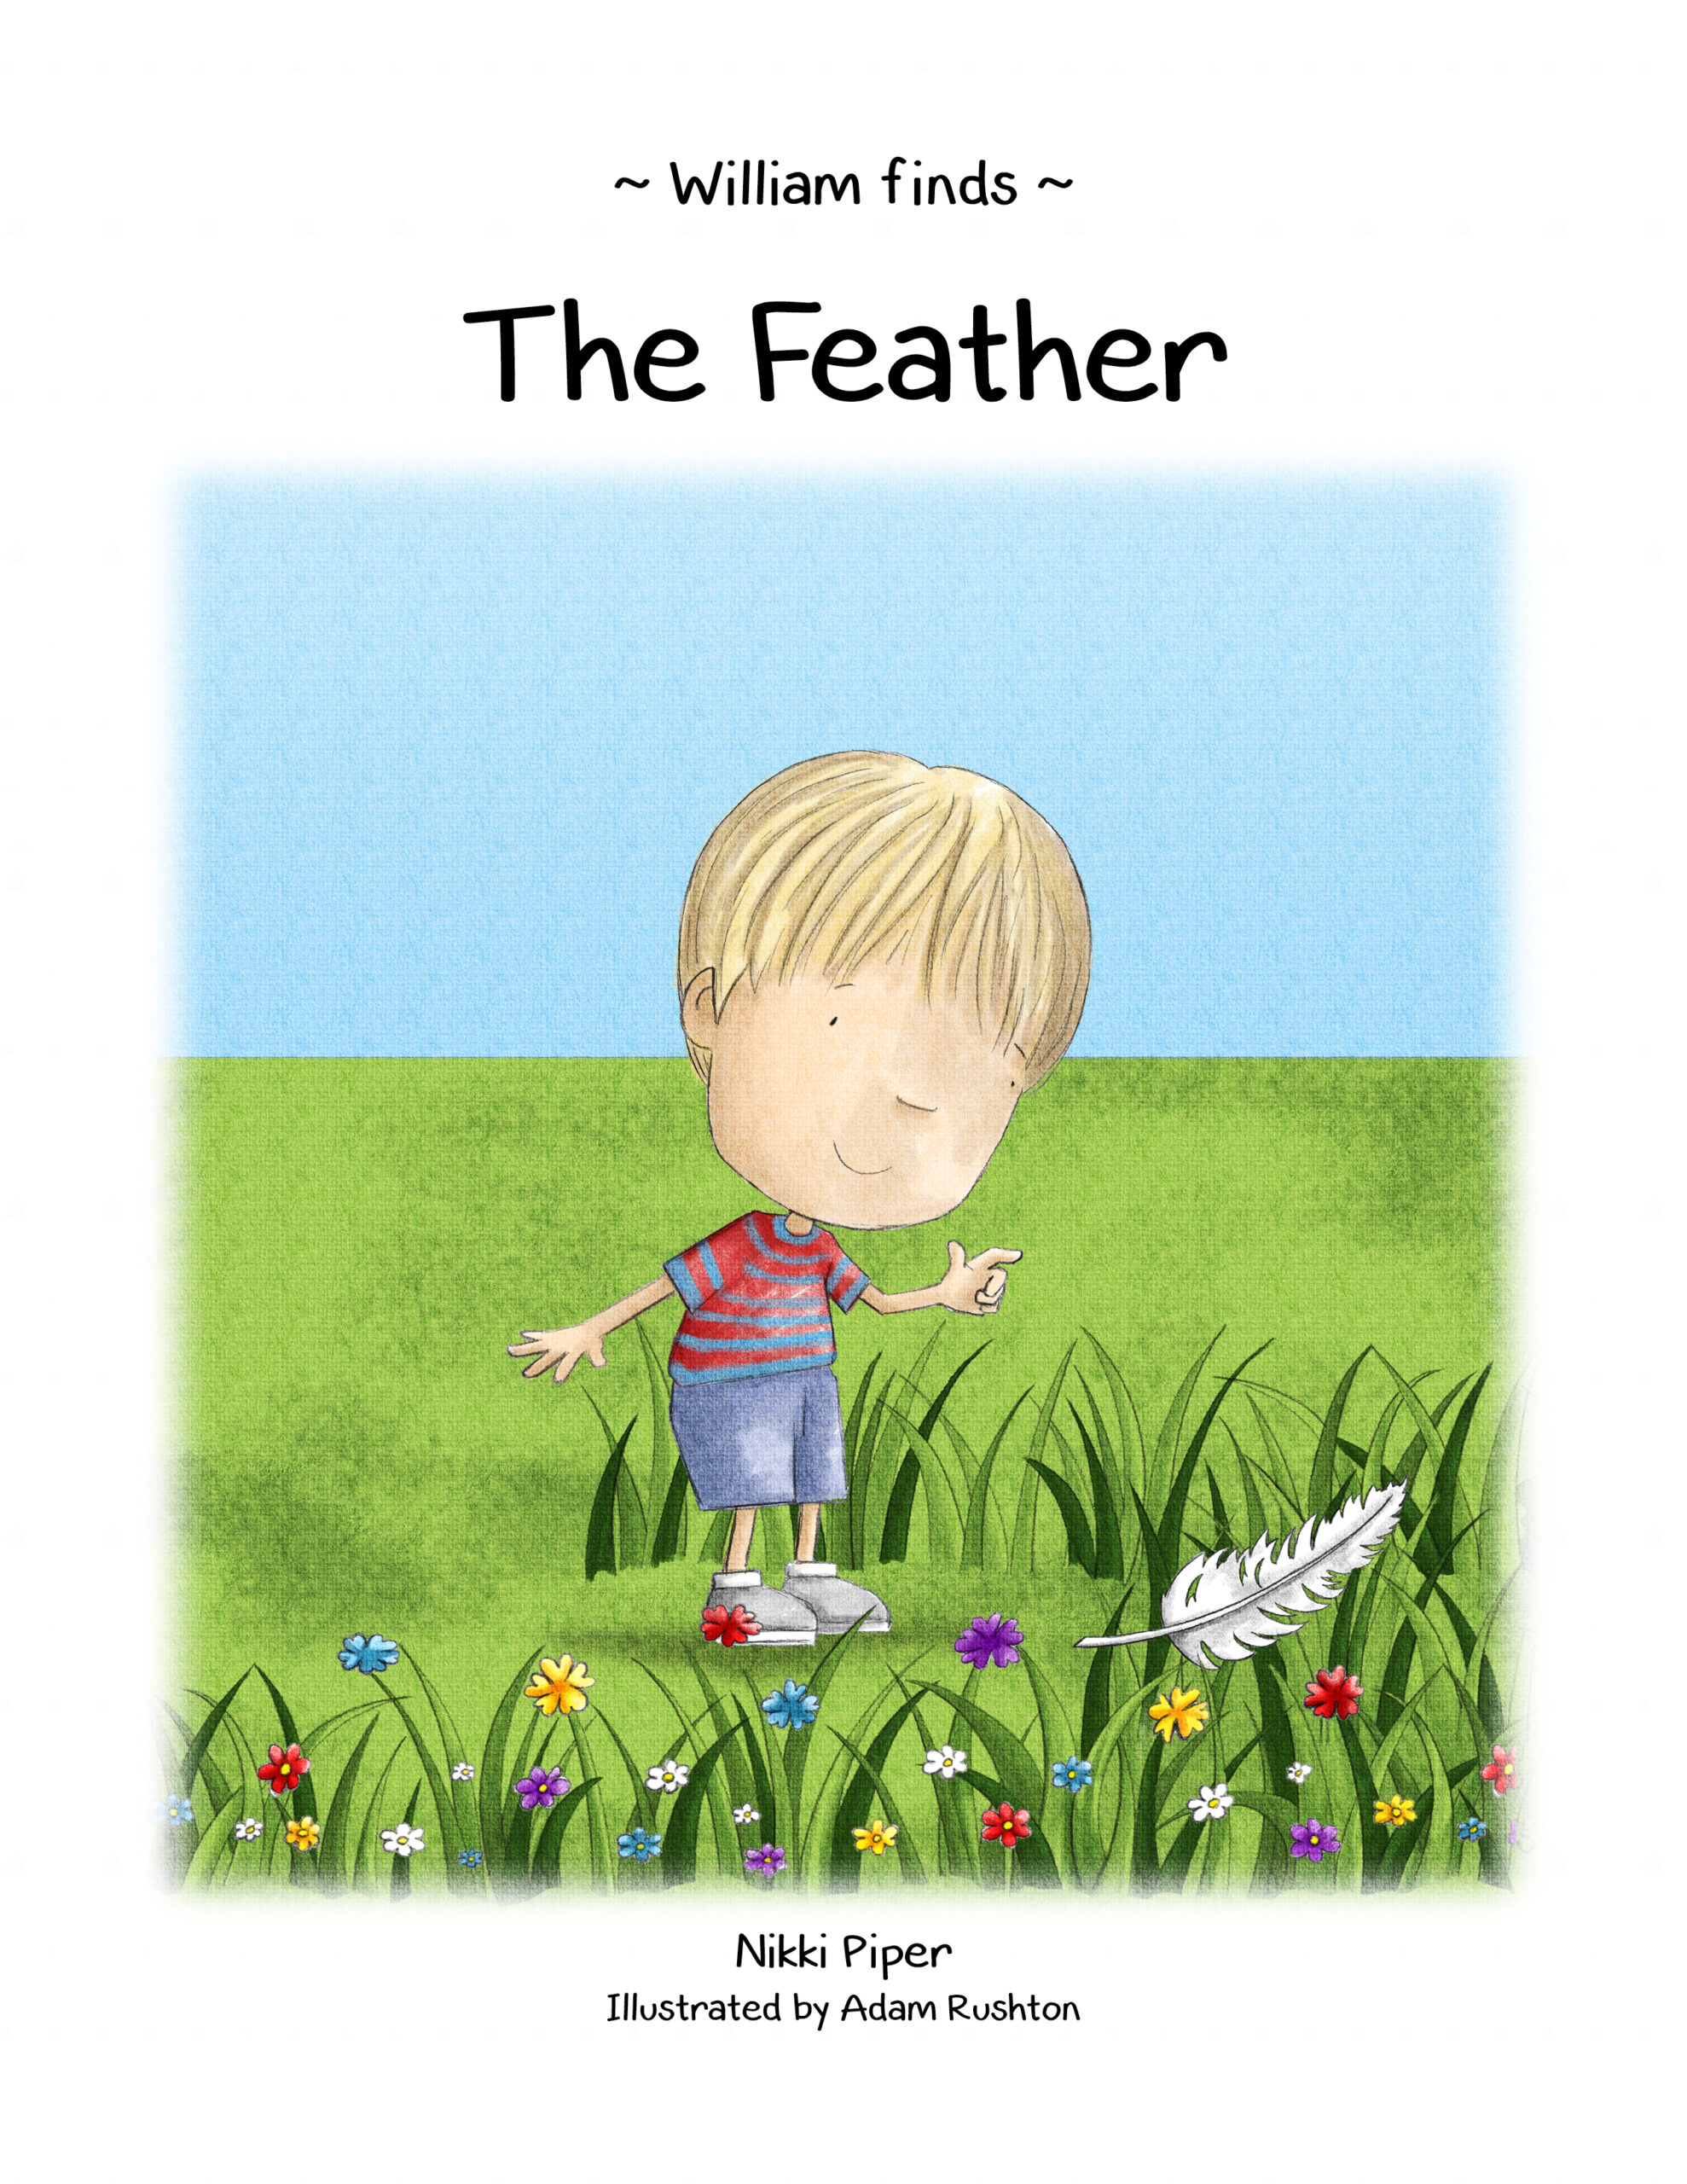 William Finds 'The Feather' book cover